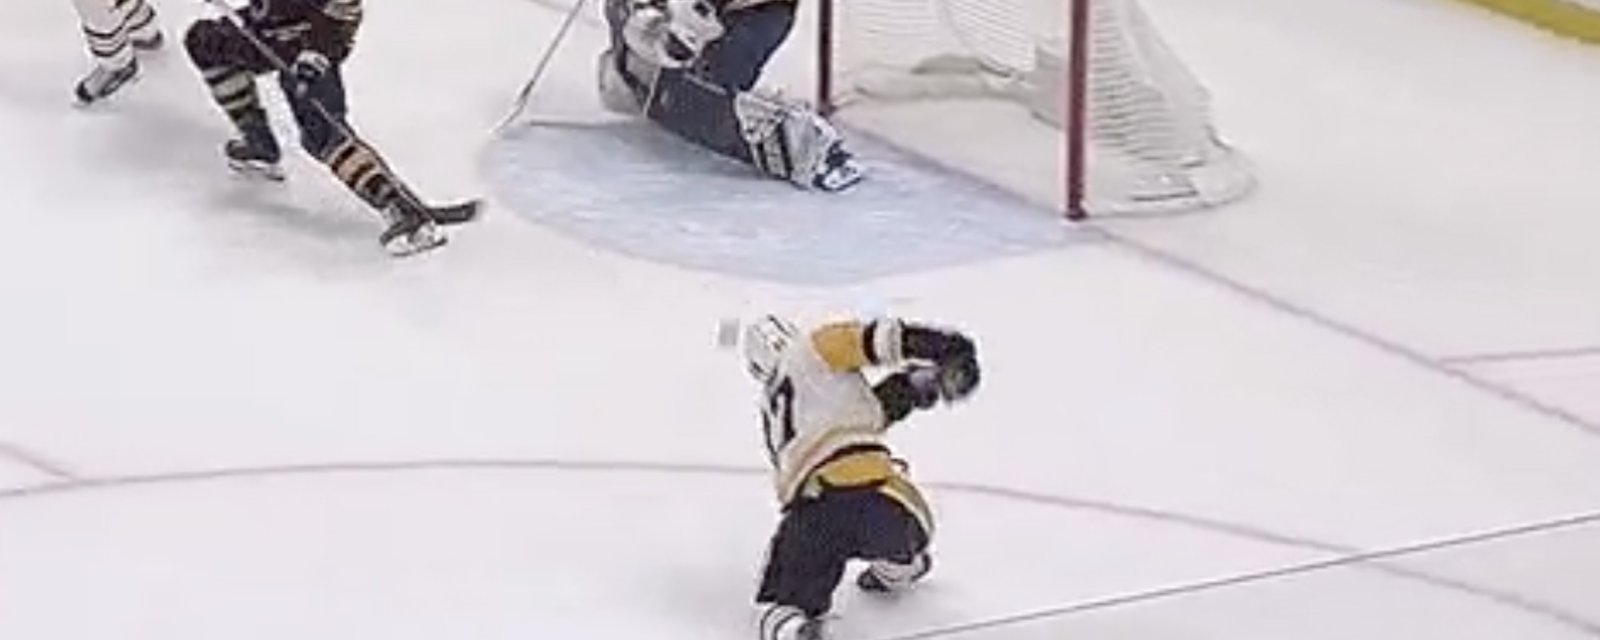 Crosby ties Jagr for 2nd place in Penguins history with balancing act goal! 